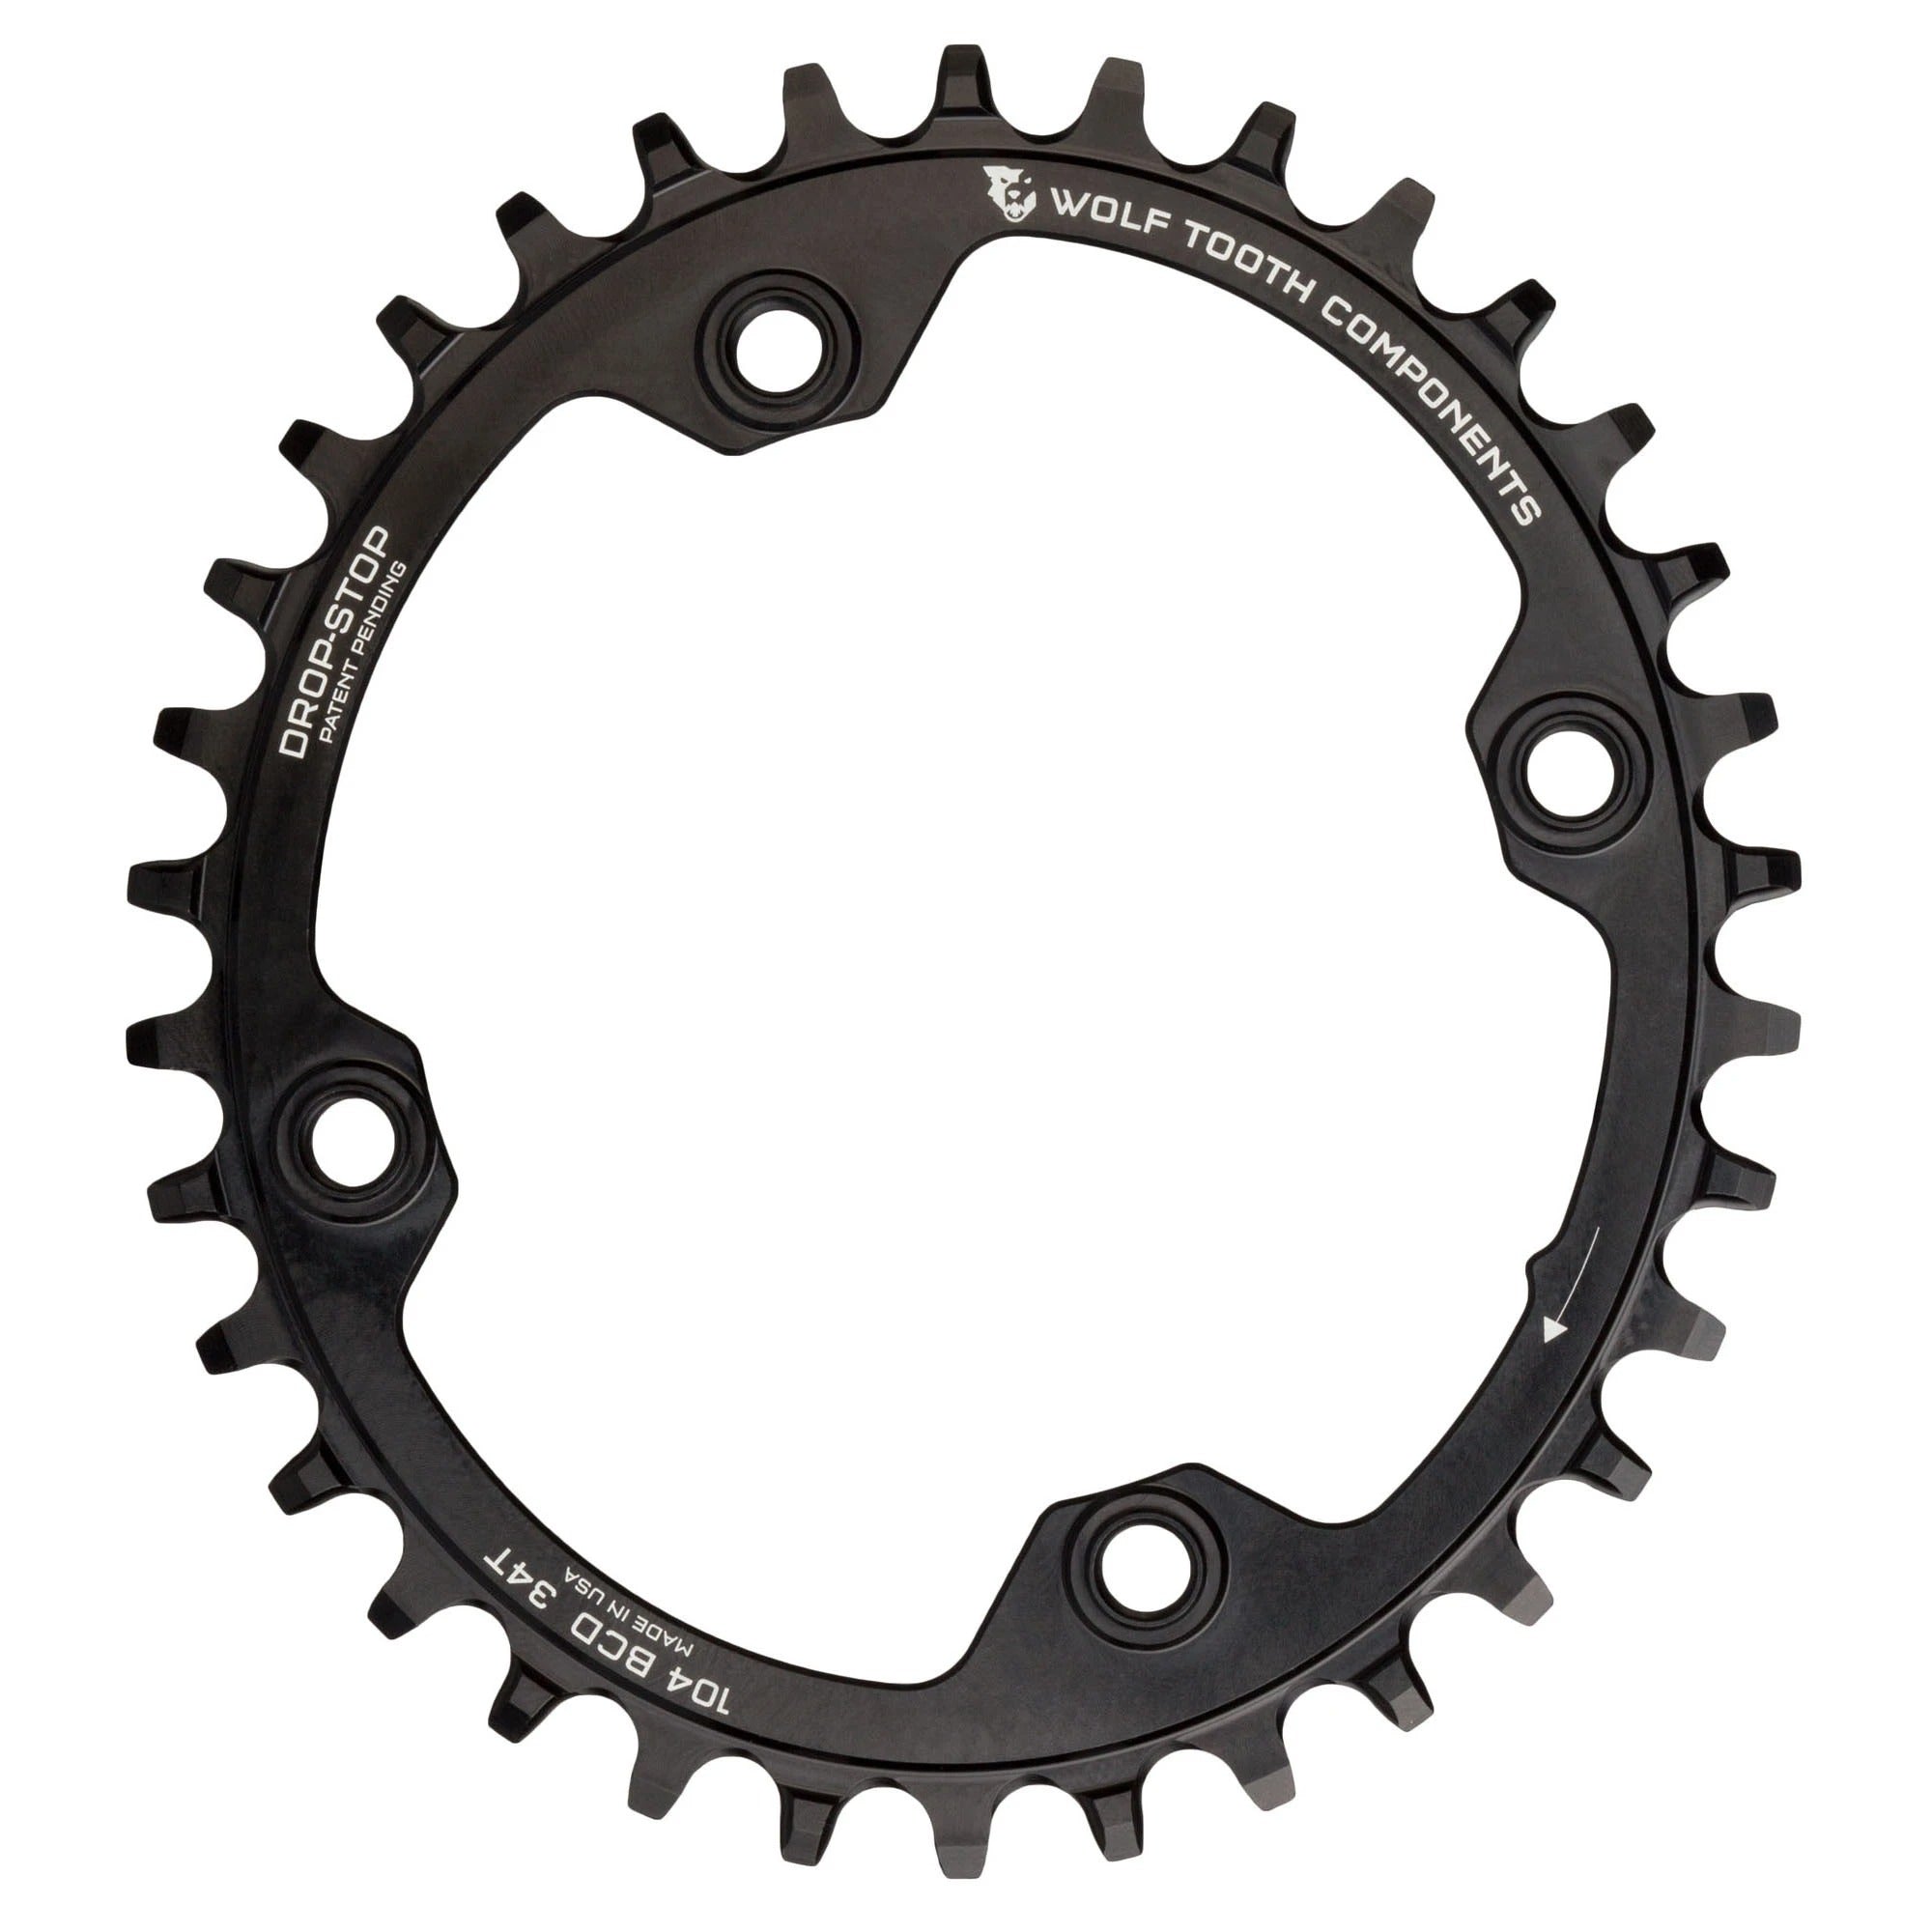 WOLF TOOTH Dropstop Chainring 104BCD 4arm